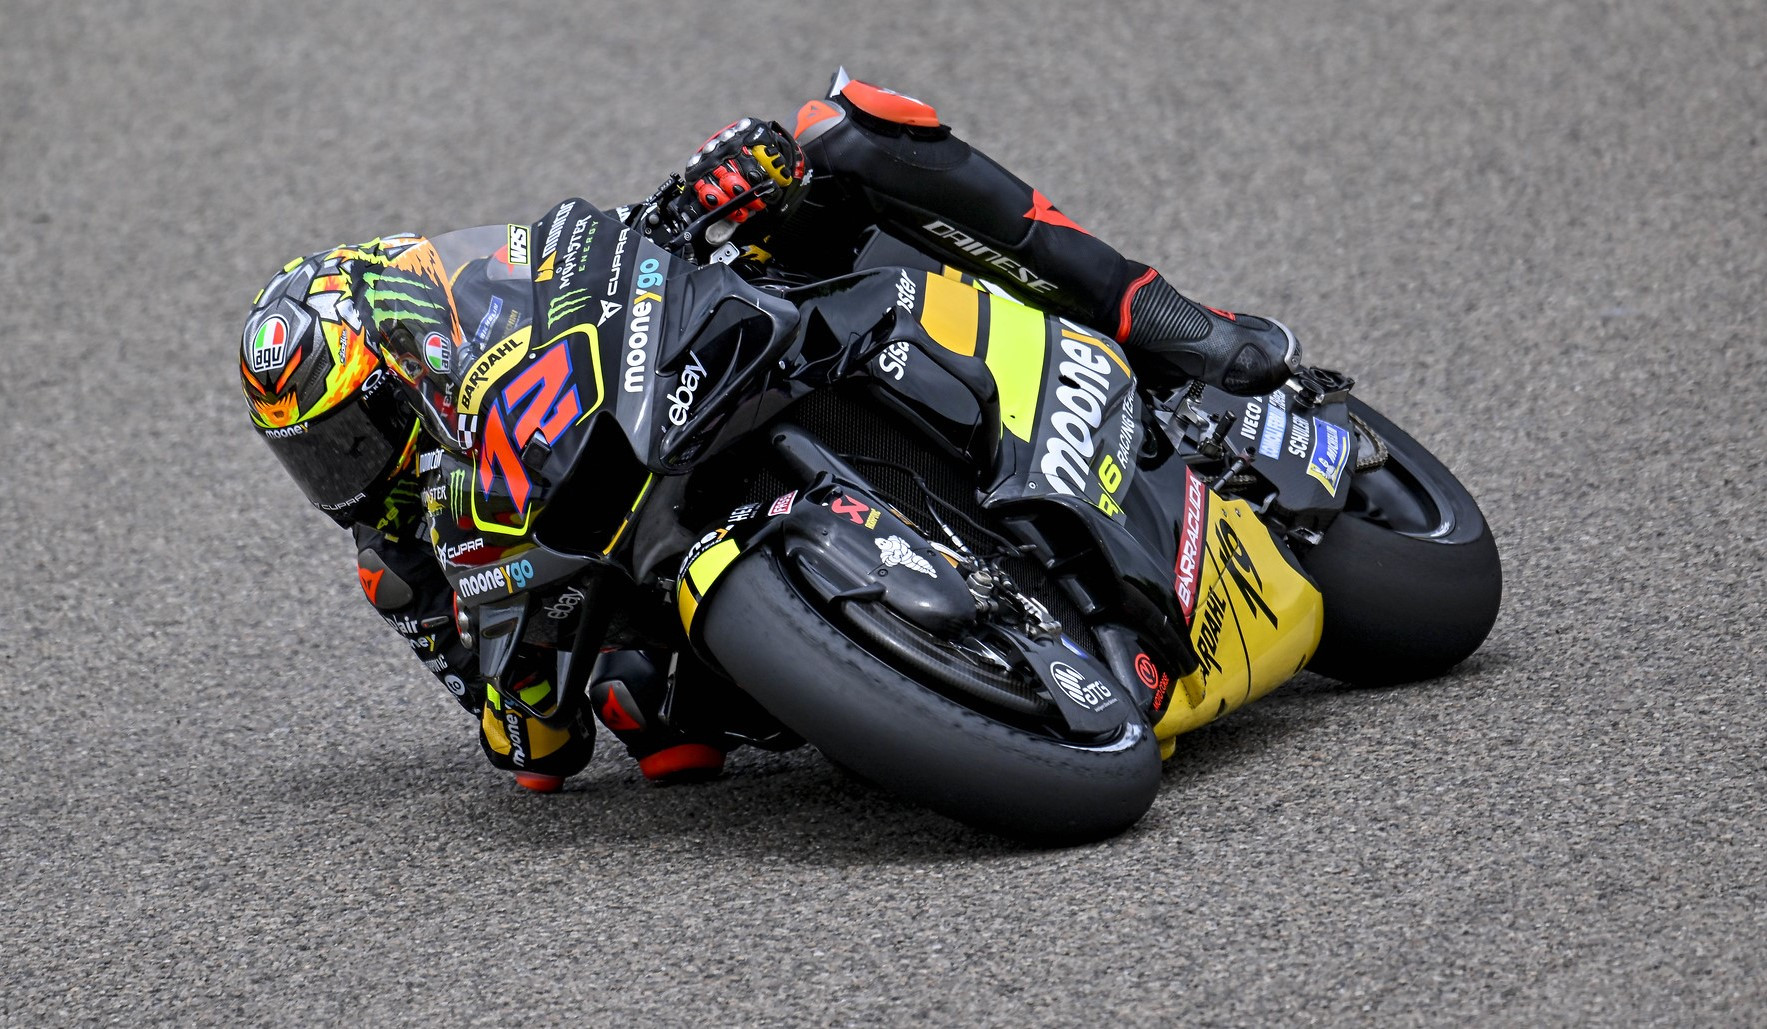 Marco Bezzecchi (72), as seen at Sachsenring. Photo courtesy Mooney VR46 Racing Team.